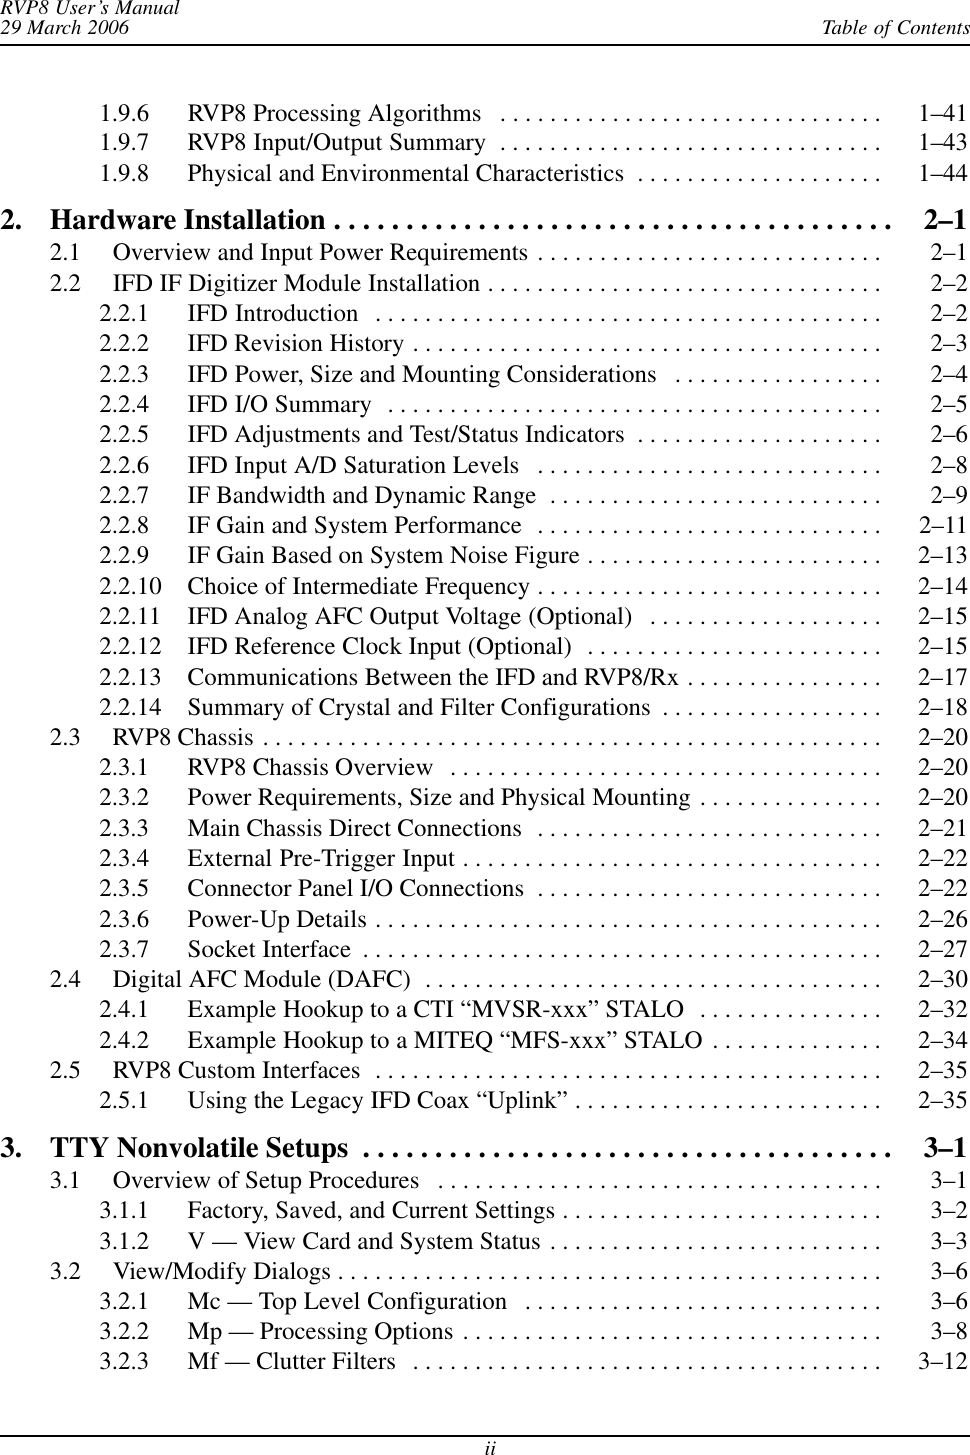 Table of ContentsRVP8 User’s Manual29 March 2006ii1.9.6 RVP8 Processing Algorithms 1–41 . . . . . . . . . . . . . . . . . . . . . . . . . . . . . . . 1.9.7 RVP8 Input/Output Summary 1–43 . . . . . . . . . . . . . . . . . . . . . . . . . . . . . . . 1.9.8 Physical and Environmental Characteristics 1–44 . . . . . . . . . . . . . . . . . . . . 2. Hardware Installation 2–1 . . . . . . . . . . . . . . . . . . . . . . . . . . . . . . . . . . . . . . . 2.1 Overview and Input Power Requirements 2–1 . . . . . . . . . . . . . . . . . . . . . . . . . . . . 2.2 IFD IF Digitizer Module Installation 2–2 . . . . . . . . . . . . . . . . . . . . . . . . . . . . . . . . 2.2.1 IFD Introduction 2–2 . . . . . . . . . . . . . . . . . . . . . . . . . . . . . . . . . . . . . . . . . 2.2.2 IFD Revision History 2–3 . . . . . . . . . . . . . . . . . . . . . . . . . . . . . . . . . . . . . . 2.2.3 IFD Power, Size and Mounting Considerations 2–4 . . . . . . . . . . . . . . . . . 2.2.4 IFD I/O Summary 2–5 . . . . . . . . . . . . . . . . . . . . . . . . . . . . . . . . . . . . . . . . 2.2.5 IFD Adjustments and Test/Status Indicators 2–6 . . . . . . . . . . . . . . . . . . . . 2.2.6 IFD Input A/D Saturation Levels 2–8 . . . . . . . . . . . . . . . . . . . . . . . . . . . . 2.2.7 IF Bandwidth and Dynamic Range 2–9 . . . . . . . . . . . . . . . . . . . . . . . . . . . 2.2.8 IF Gain and System Performance 2–11 . . . . . . . . . . . . . . . . . . . . . . . . . . . . 2.2.9 IF Gain Based on System Noise Figure 2–13 . . . . . . . . . . . . . . . . . . . . . . . . 2.2.10 Choice of Intermediate Frequency 2–14 . . . . . . . . . . . . . . . . . . . . . . . . . . . . 2.2.11 IFD Analog AFC Output Voltage (Optional) 2–15 . . . . . . . . . . . . . . . . . . . 2.2.12 IFD Reference Clock Input (Optional) 2–15 . . . . . . . . . . . . . . . . . . . . . . . . 2.2.13 Communications Between the IFD and RVP8/Rx 2–17 . . . . . . . . . . . . . . . . 2.2.14 Summary of Crystal and Filter Configurations 2–18 . . . . . . . . . . . . . . . . . . 2.3 RVP8 Chassis 2–20 . . . . . . . . . . . . . . . . . . . . . . . . . . . . . . . . . . . . . . . . . . . . . . . . . . 2.3.1 RVP8 Chassis Overview 2–20 . . . . . . . . . . . . . . . . . . . . . . . . . . . . . . . . . . . 2.3.2 Power Requirements, Size and Physical Mounting 2–20 . . . . . . . . . . . . . . . 2.3.3 Main Chassis Direct Connections 2–21 . . . . . . . . . . . . . . . . . . . . . . . . . . . . 2.3.4 External Pre-Trigger Input 2–22 . . . . . . . . . . . . . . . . . . . . . . . . . . . . . . . . . . 2.3.5 Connector Panel I/O Connections 2–22 . . . . . . . . . . . . . . . . . . . . . . . . . . . . 2.3.6 Power-Up Details 2–26 . . . . . . . . . . . . . . . . . . . . . . . . . . . . . . . . . . . . . . . . . 2.3.7 Socket Interface 2–27 . . . . . . . . . . . . . . . . . . . . . . . . . . . . . . . . . . . . . . . . . . 2.4 Digital AFC Module (DAFC) 2–30 . . . . . . . . . . . . . . . . . . . . . . . . . . . . . . . . . . . . . 2.4.1 Example Hookup to a CTI “MVSR-xxx” STALO 2–32 . . . . . . . . . . . . . . . 2.4.2 Example Hookup to a MITEQ “MFS-xxx” STALO 2–34 . . . . . . . . . . . . . . 2.5 RVP8 Custom Interfaces 2–35 . . . . . . . . . . . . . . . . . . . . . . . . . . . . . . . . . . . . . . . . . 2.5.1 Using the Legacy IFD Coax “Uplink” 2–35 . . . . . . . . . . . . . . . . . . . . . . . . . 3. TTY Nonvolatile Setups 3–1 . . . . . . . . . . . . . . . . . . . . . . . . . . . . . . . . . . . . . 3.1 Overview of Setup Procedures 3–1 . . . . . . . . . . . . . . . . . . . . . . . . . . . . . . . . . . . . 3.1.1 Factory, Saved, and Current Settings 3–2 . . . . . . . . . . . . . . . . . . . . . . . . . . 3.1.2 V — View Card and System Status 3–3 . . . . . . . . . . . . . . . . . . . . . . . . . . . 3.2 View/Modify Dialogs 3–6 . . . . . . . . . . . . . . . . . . . . . . . . . . . . . . . . . . . . . . . . . . . . 3.2.1 Mc — Top Level Configuration 3–6 . . . . . . . . . . . . . . . . . . . . . . . . . . . . . 3.2.2 Mp — Processing Options 3–8 . . . . . . . . . . . . . . . . . . . . . . . . . . . . . . . . . . 3.2.3 Mf — Clutter Filters 3–12 . . . . . . . . . . . . . . . . . . . . . . . . . . . . . . . . . . . . . . 